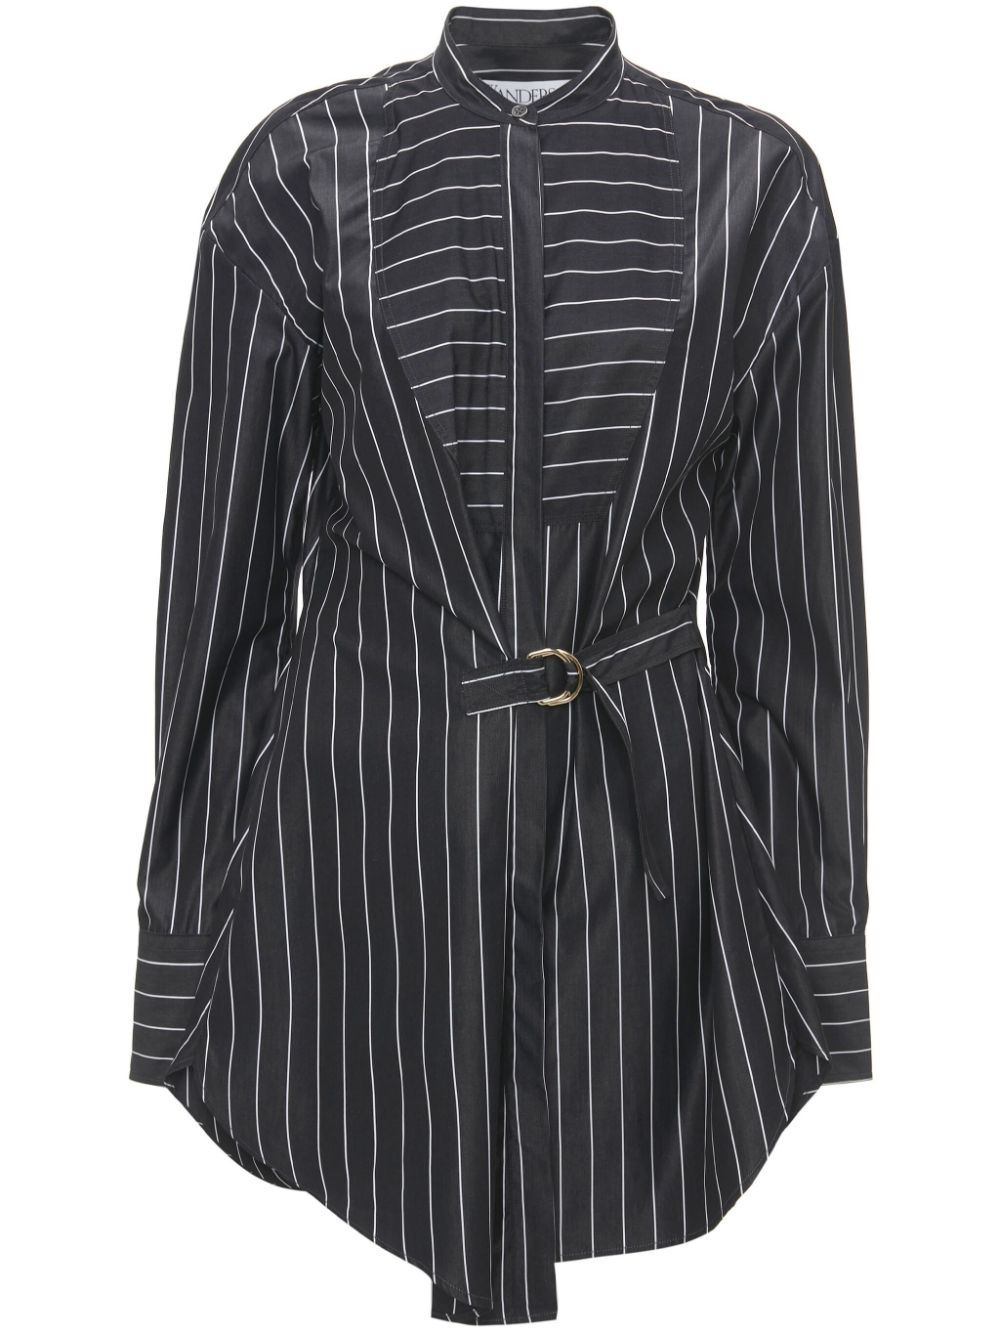 JW Anderson Twisted striped cotton shirt - Black